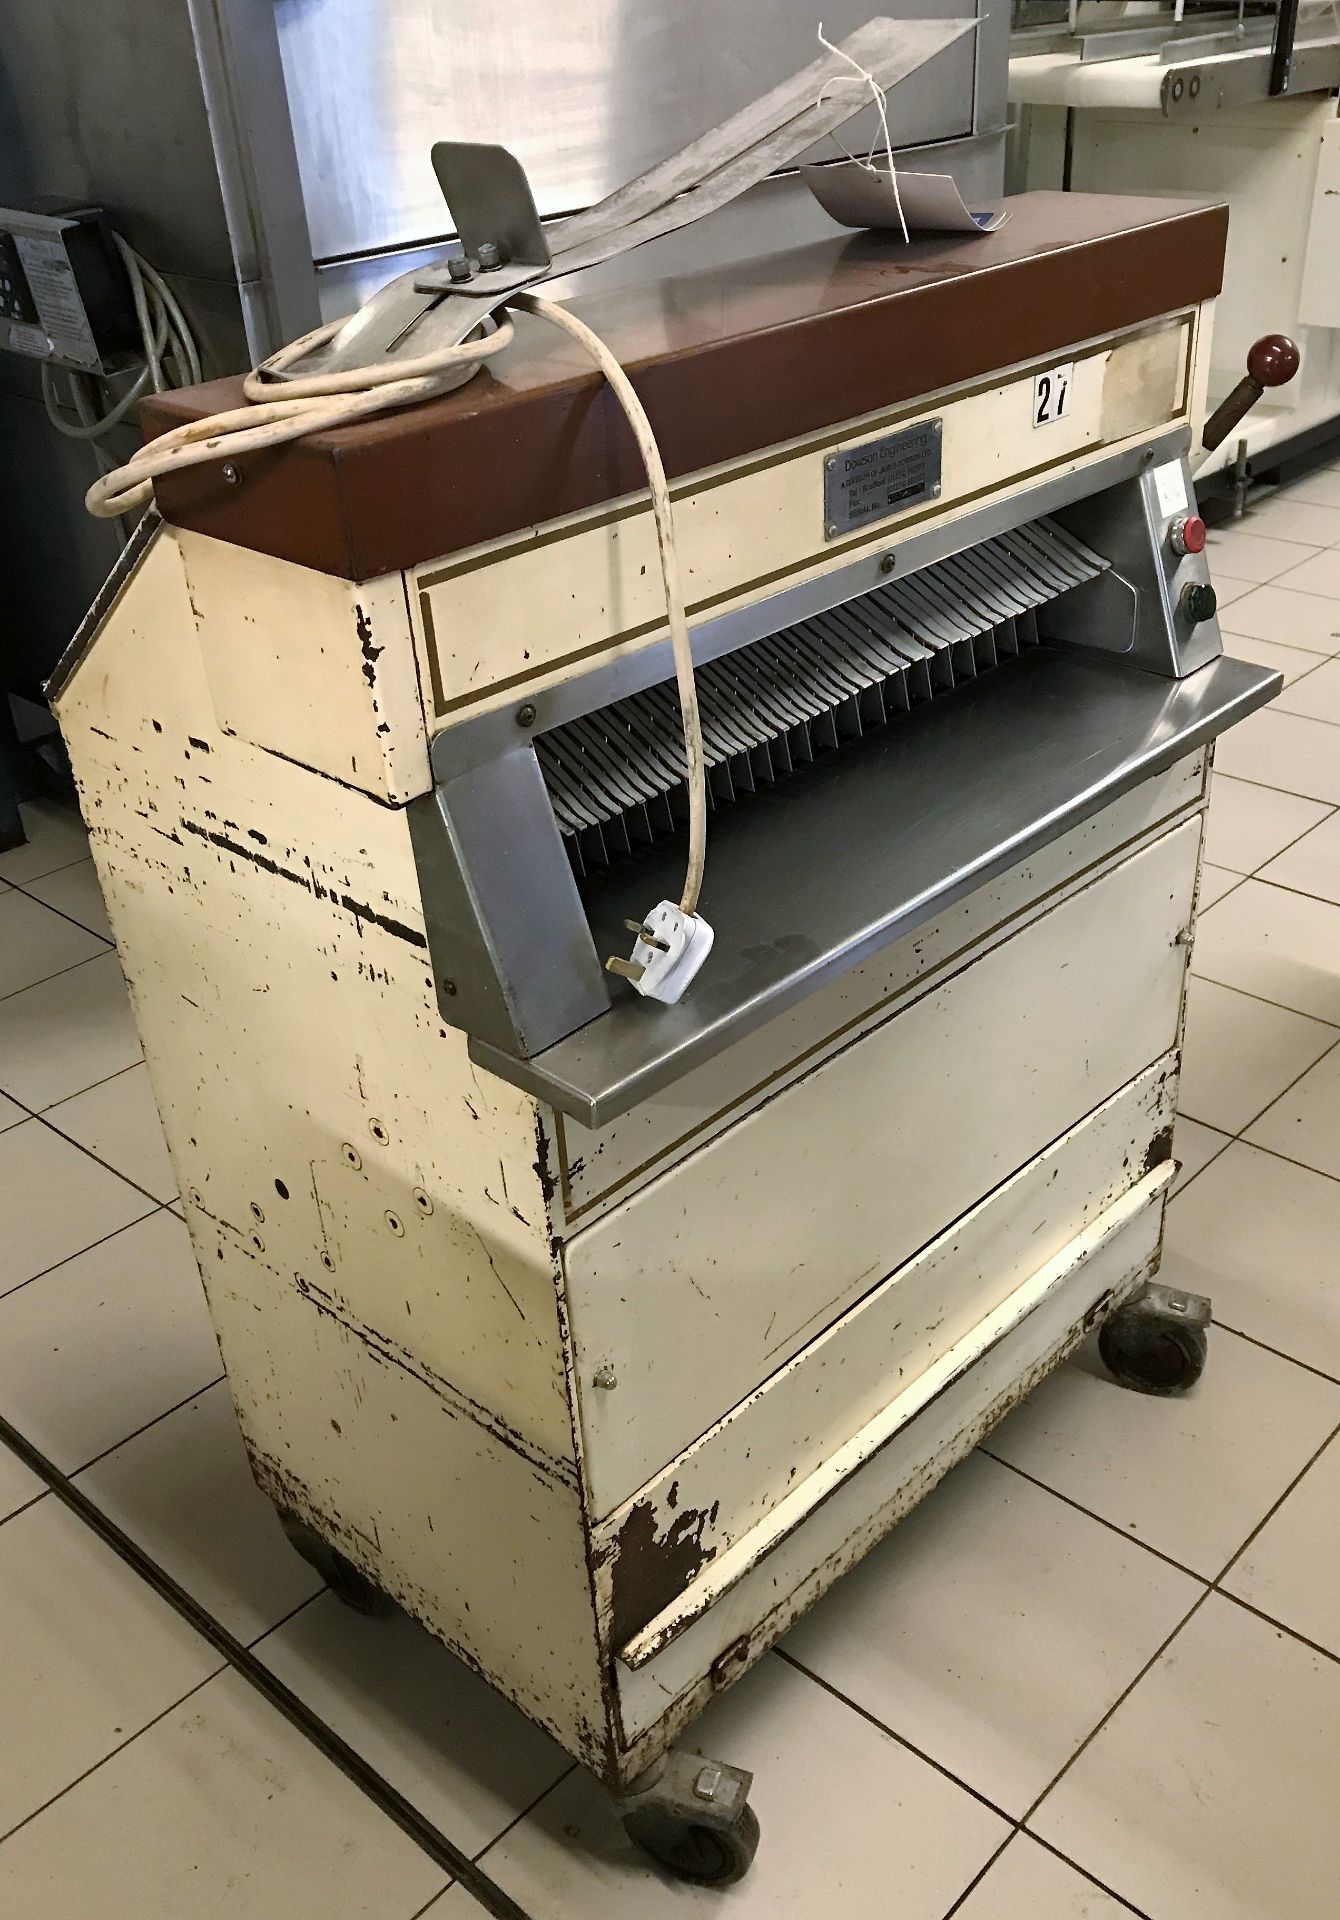 A Dowson Engineering Mobile Bread Slicing Machine No.SS30016-95 (1ph), 600mm w. - Image 2 of 2